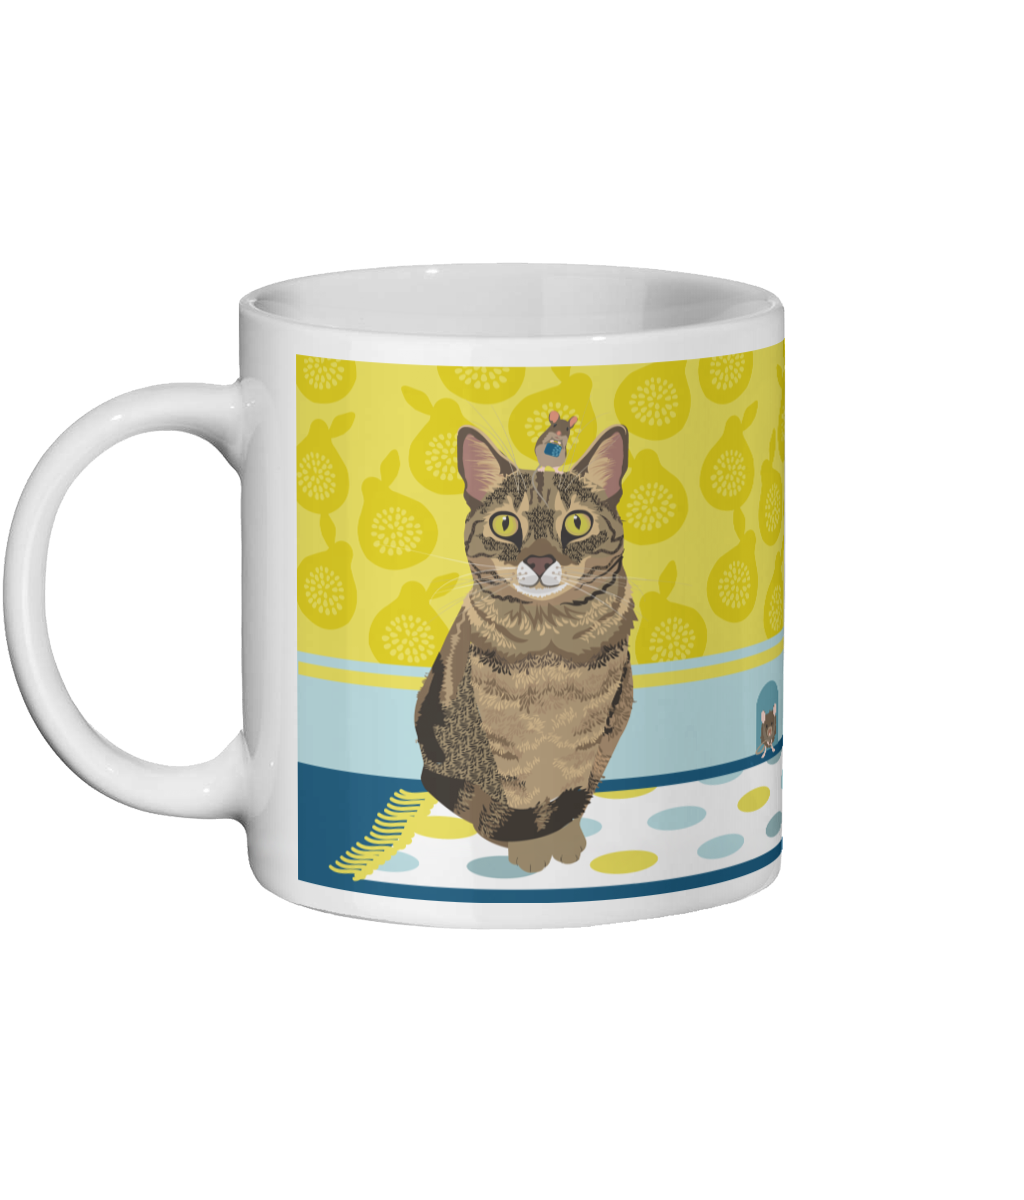 Tabby Cat and Mouse Ceramic Mug by Al Stafford